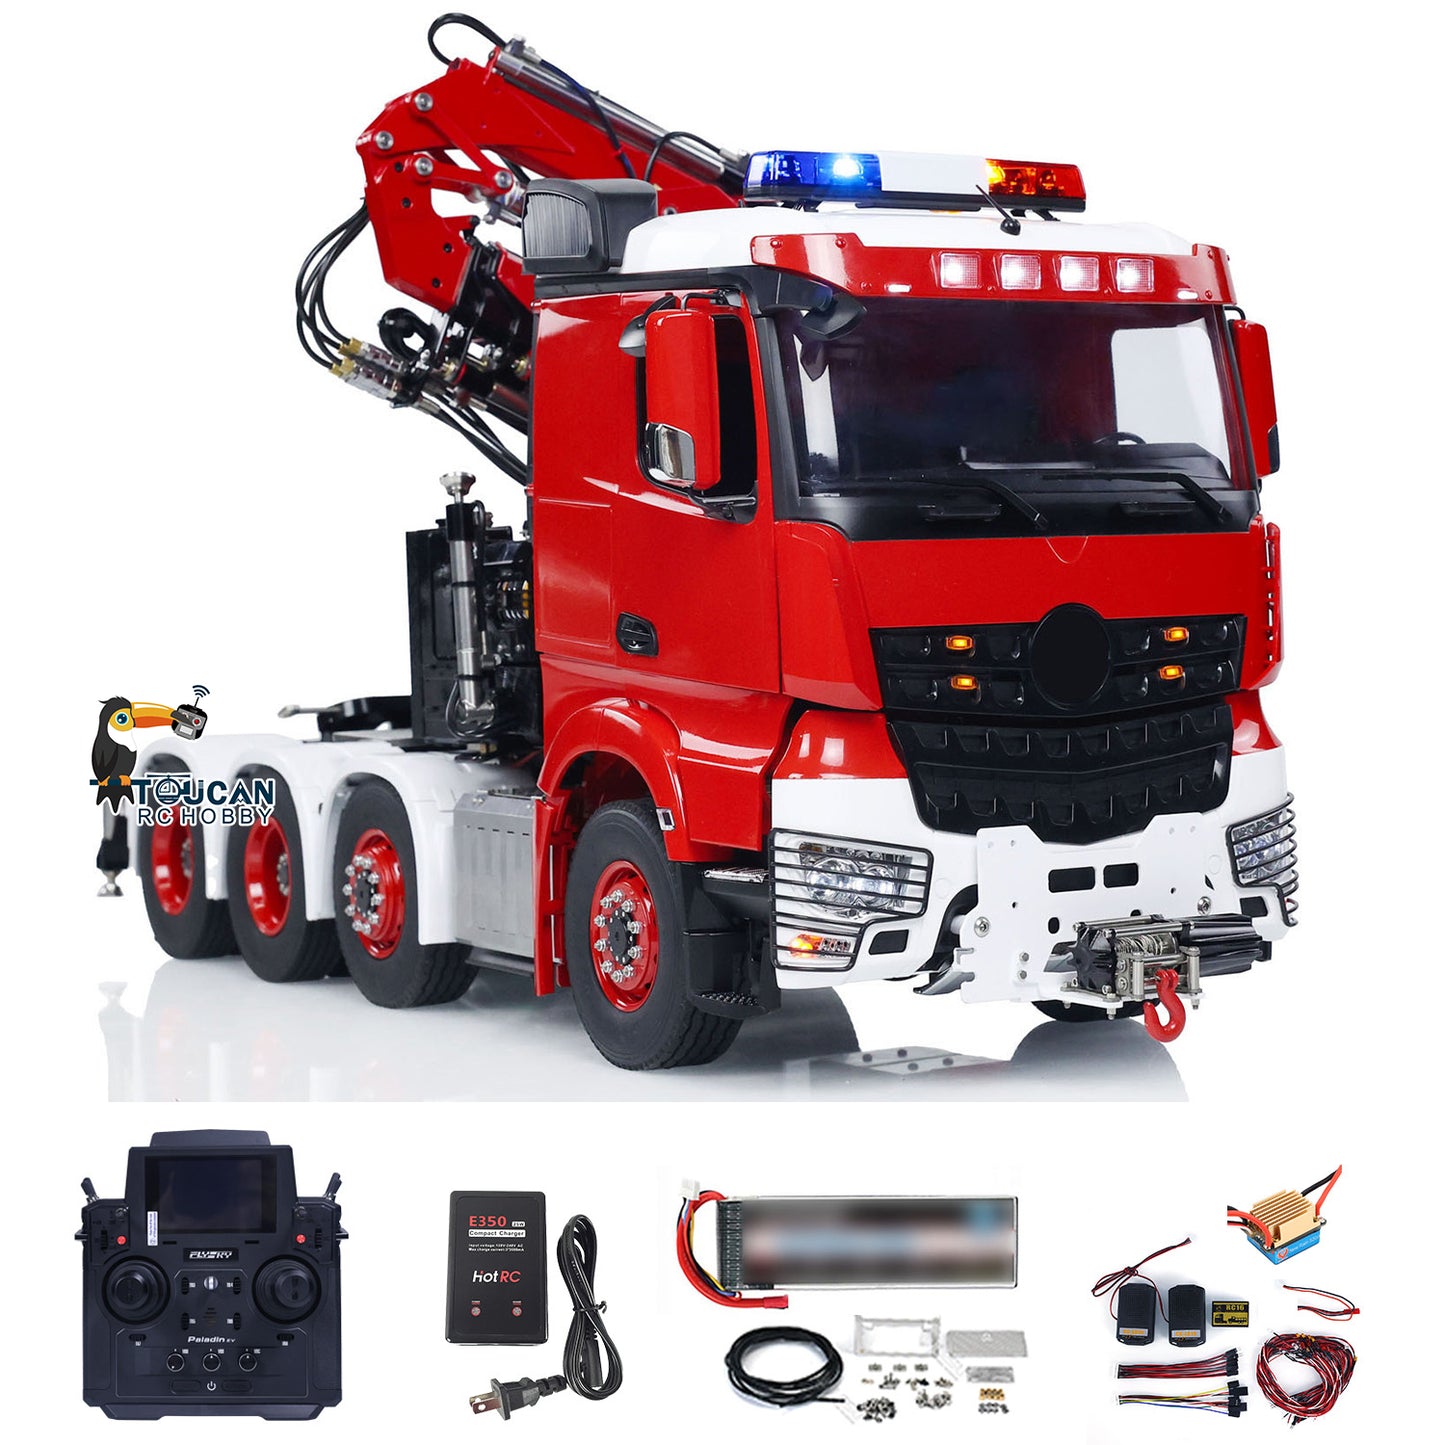 LESU 8x8 1/14 Hydraulic RC Equipment Remote Control Crane Tractor Truck Fly Jib Cars Hobby Model PNP/RTR Upgraded Ver